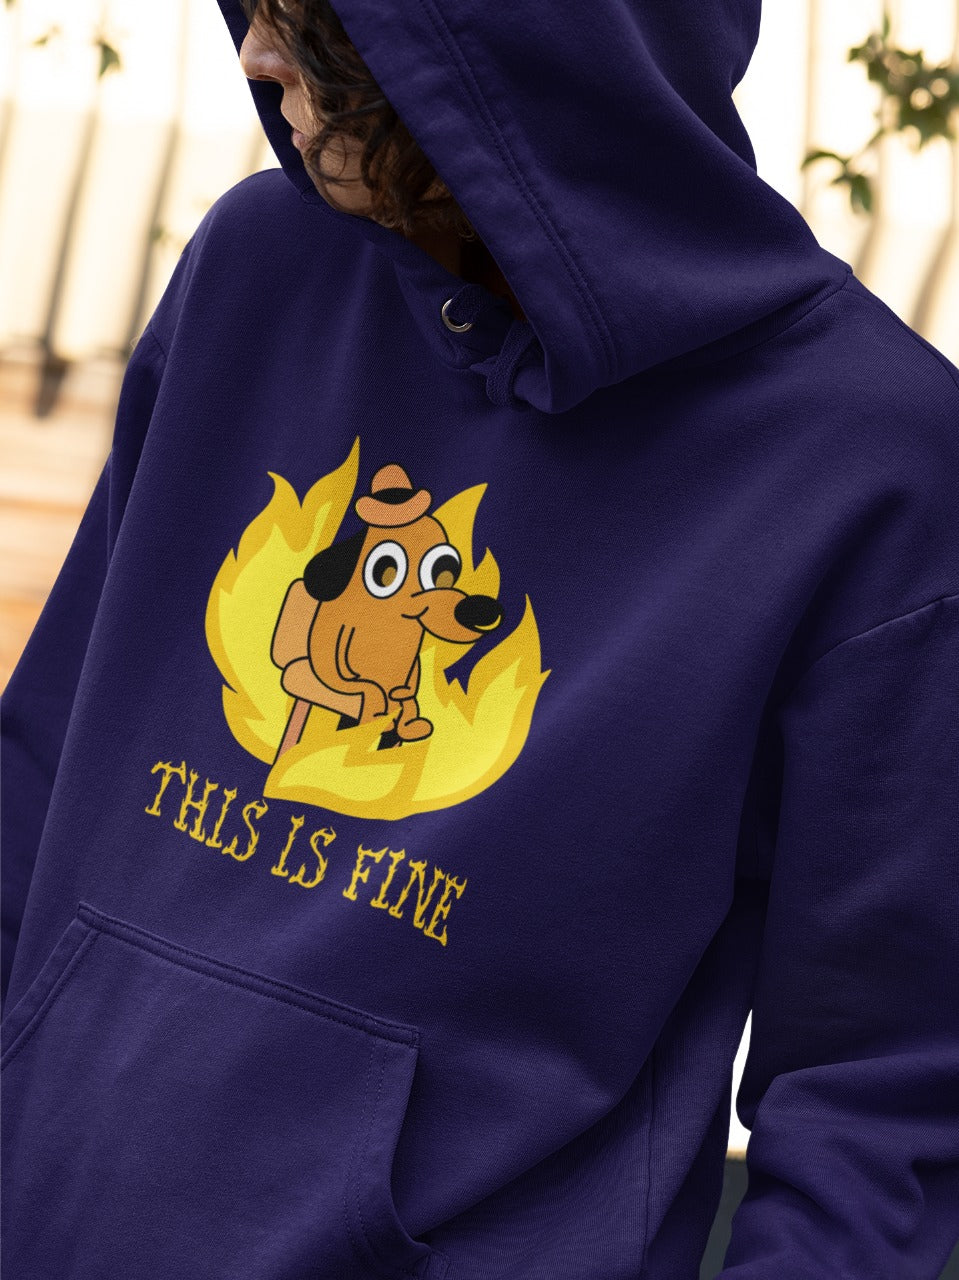 man wearing navy blue hoodie with a small dog sitting around a fire printed on it, "this is fine" in burning letter is printed below the dog, relatable sarcastic funny memes